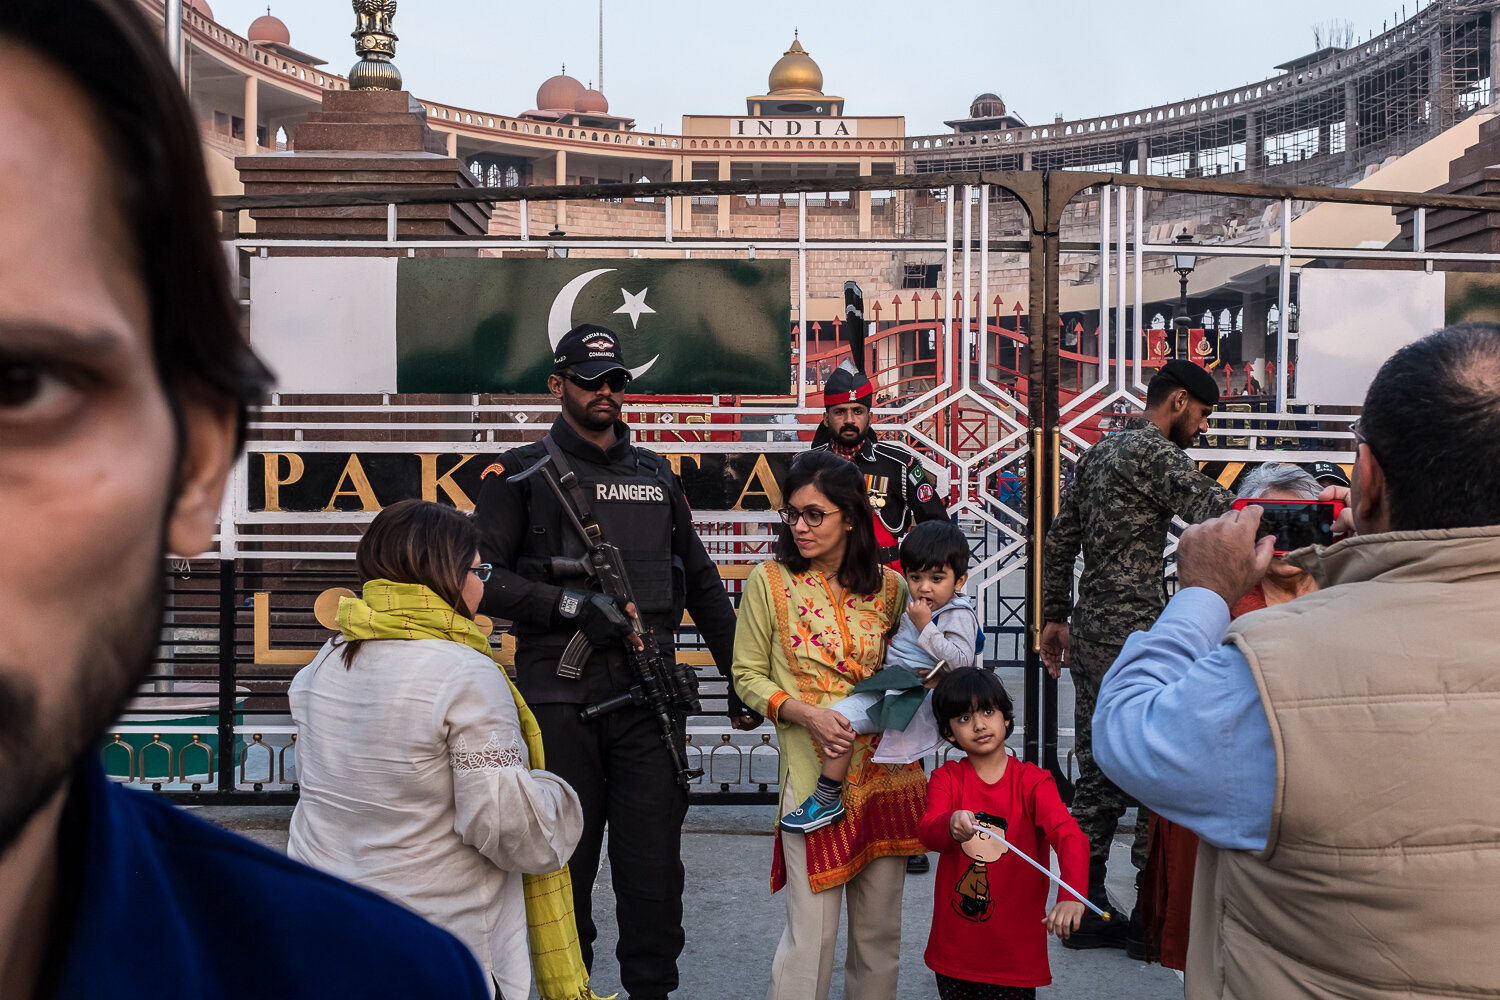  Visitors pose for pictures with border guards following the daily border closing ceremony at the border with India on Friday, November 24, 2017 in Wahga, Punjab, Pakistan. The ceremony draws large crowds on both sides of the border for a nationalist